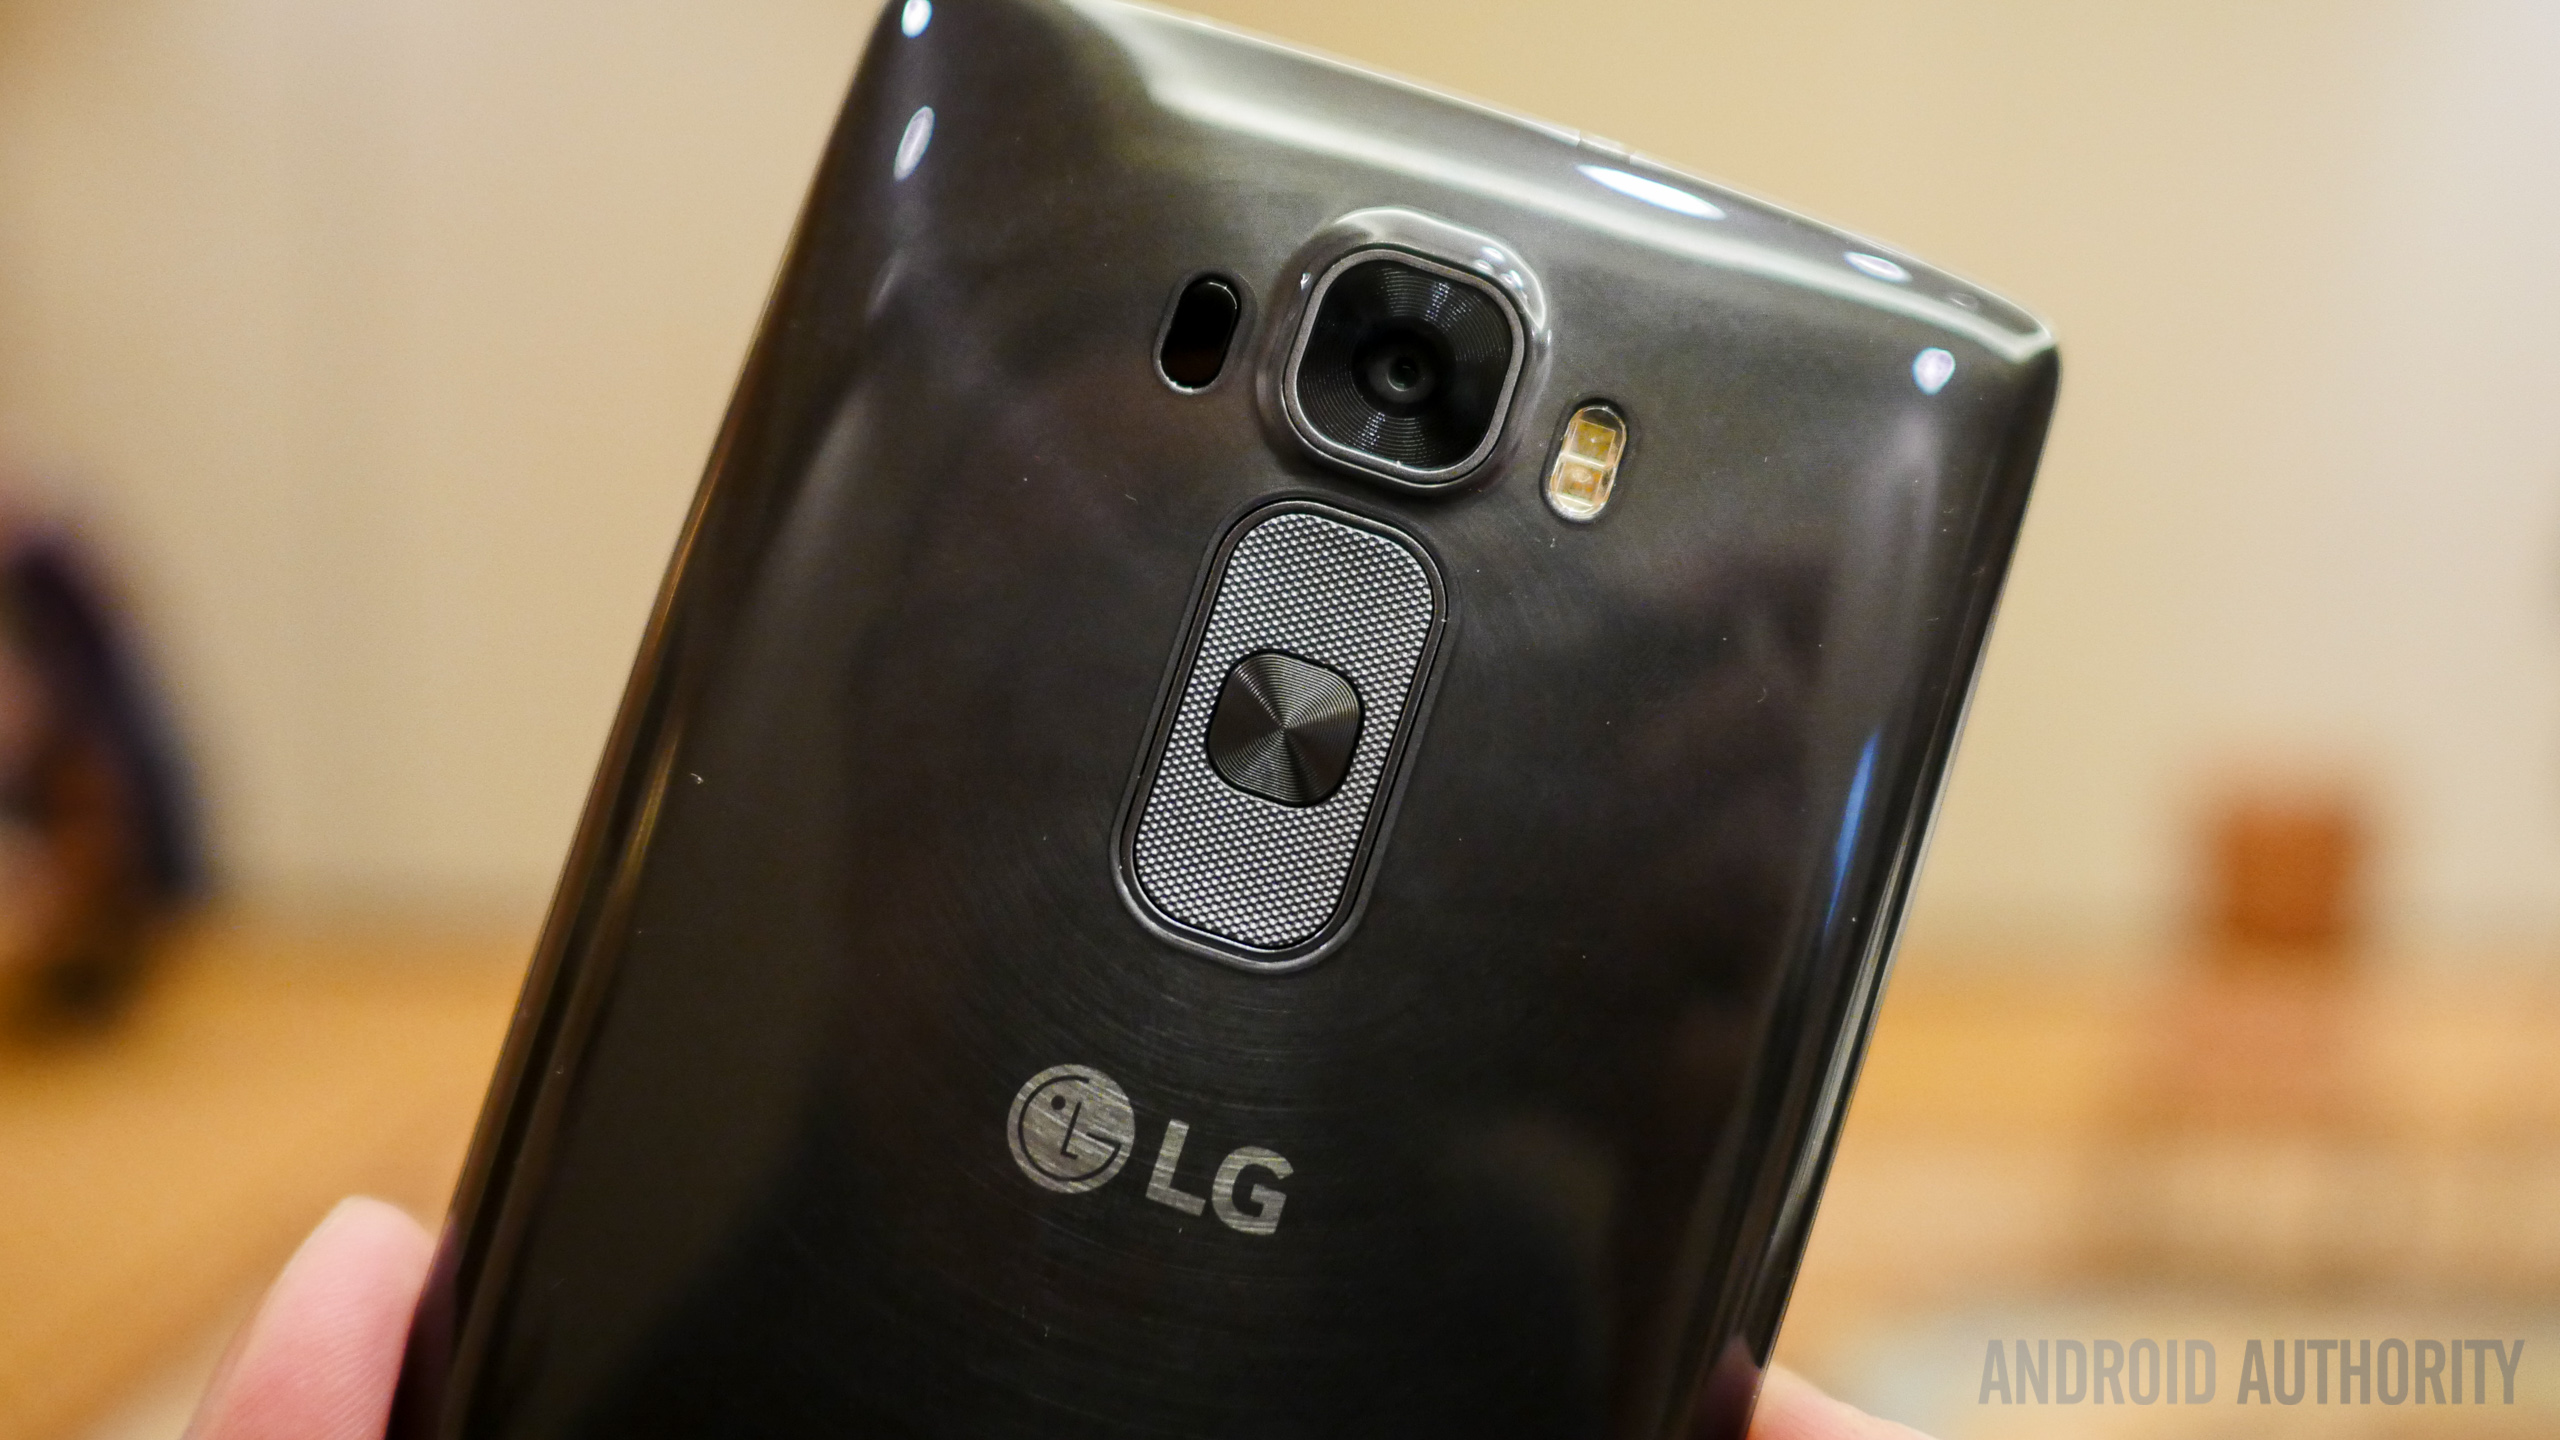 Dangle Botanik Paine Gillic  The bendy LG G Flex 2 is coming to AT&T, Sprint and US Cellular